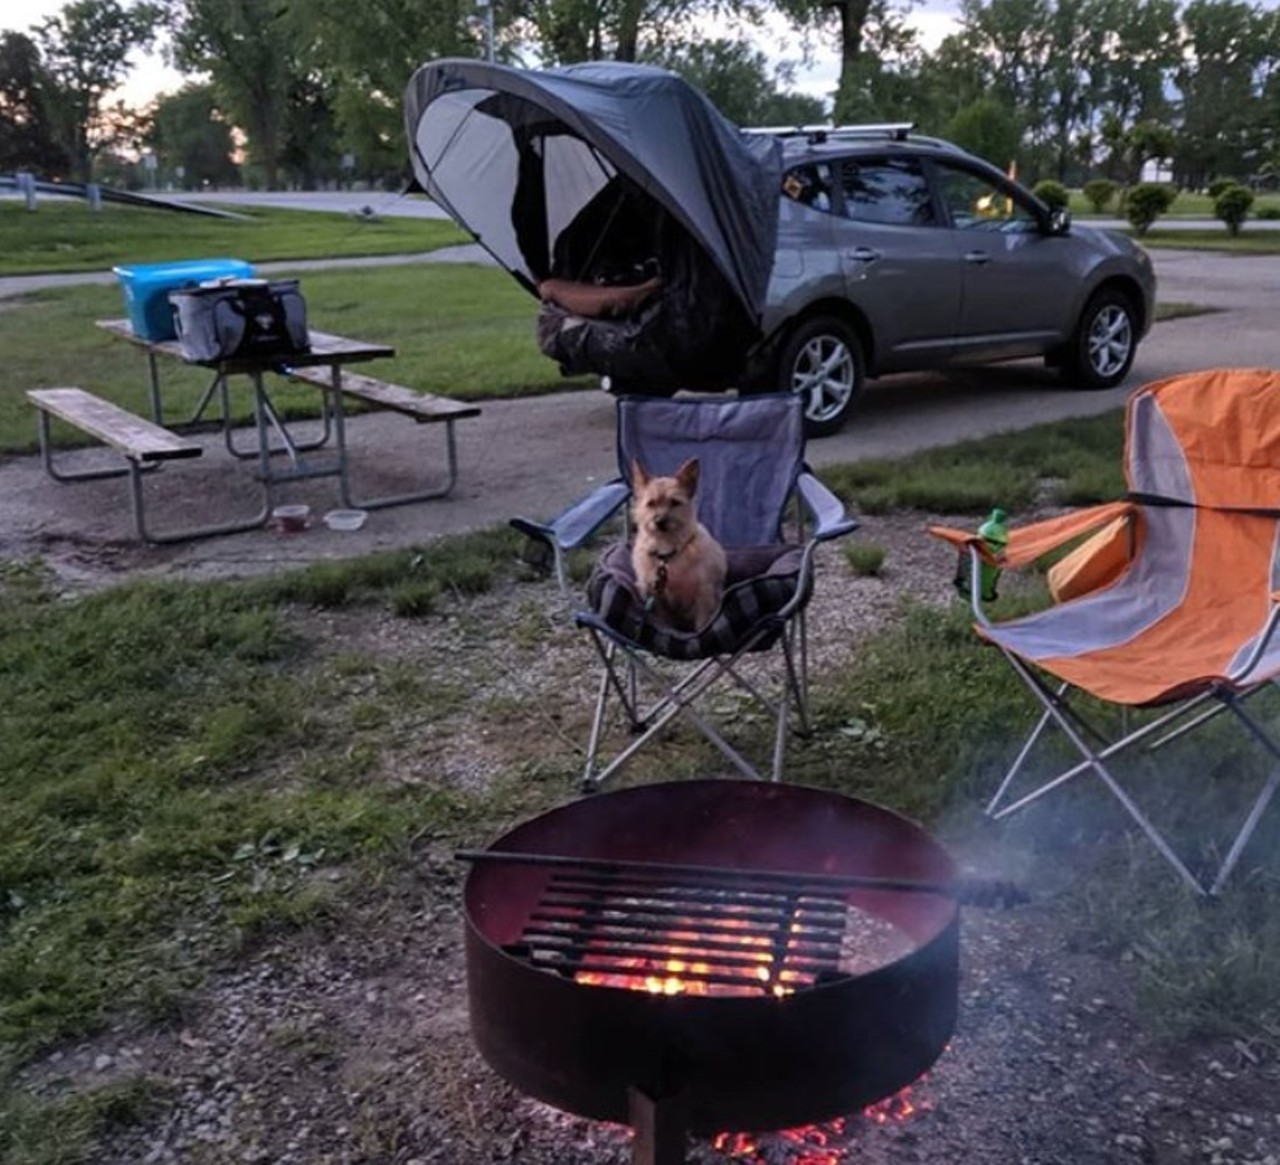 Lake Loramie State Park
4401 Ft. Loramie Swanders Road, Minster, 937-295-2011
Known as a laid-back camping destination, Lake Loramie State Park offers a variety of outdoor activities. It&#146;s also pet friendly!
Photo via hxcorey412/Instagram